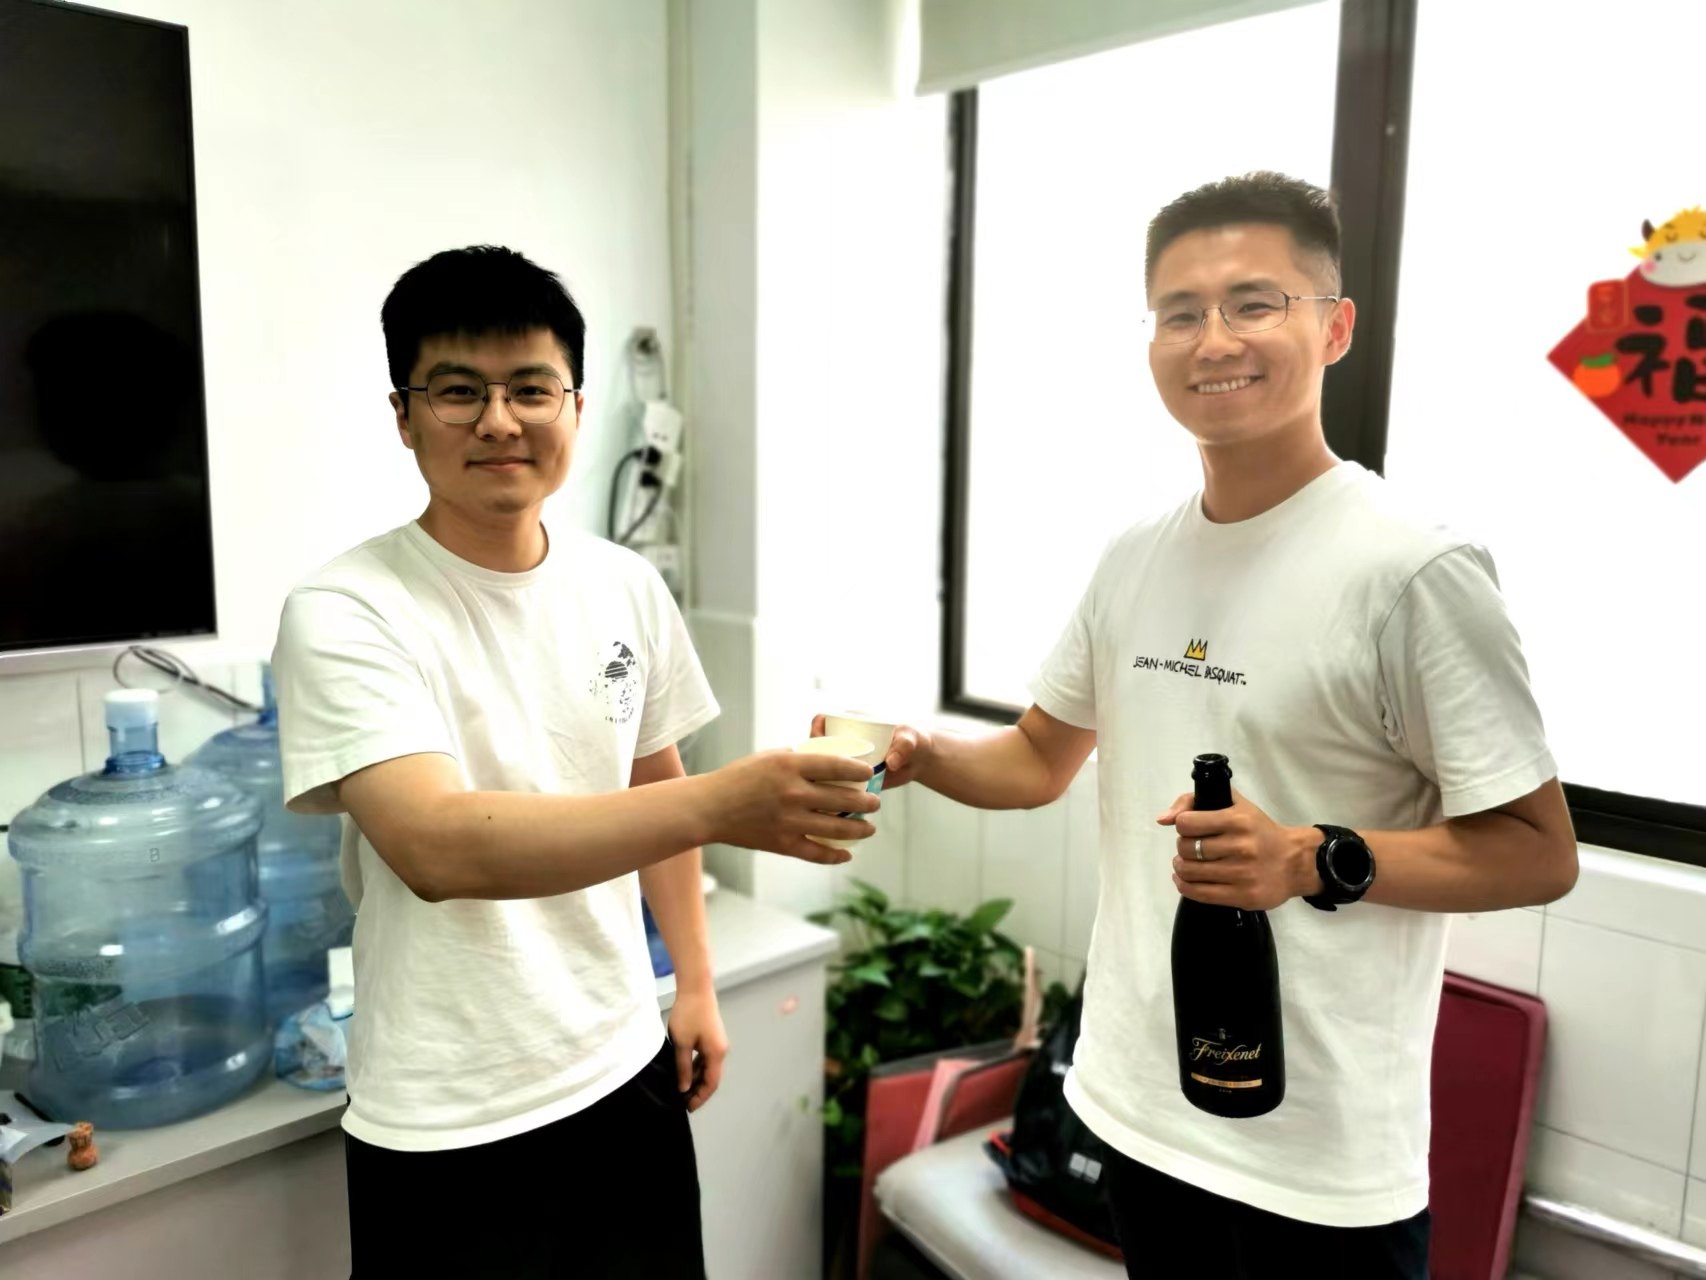 Peng and Peng-lai are now leaving our ECNU team.